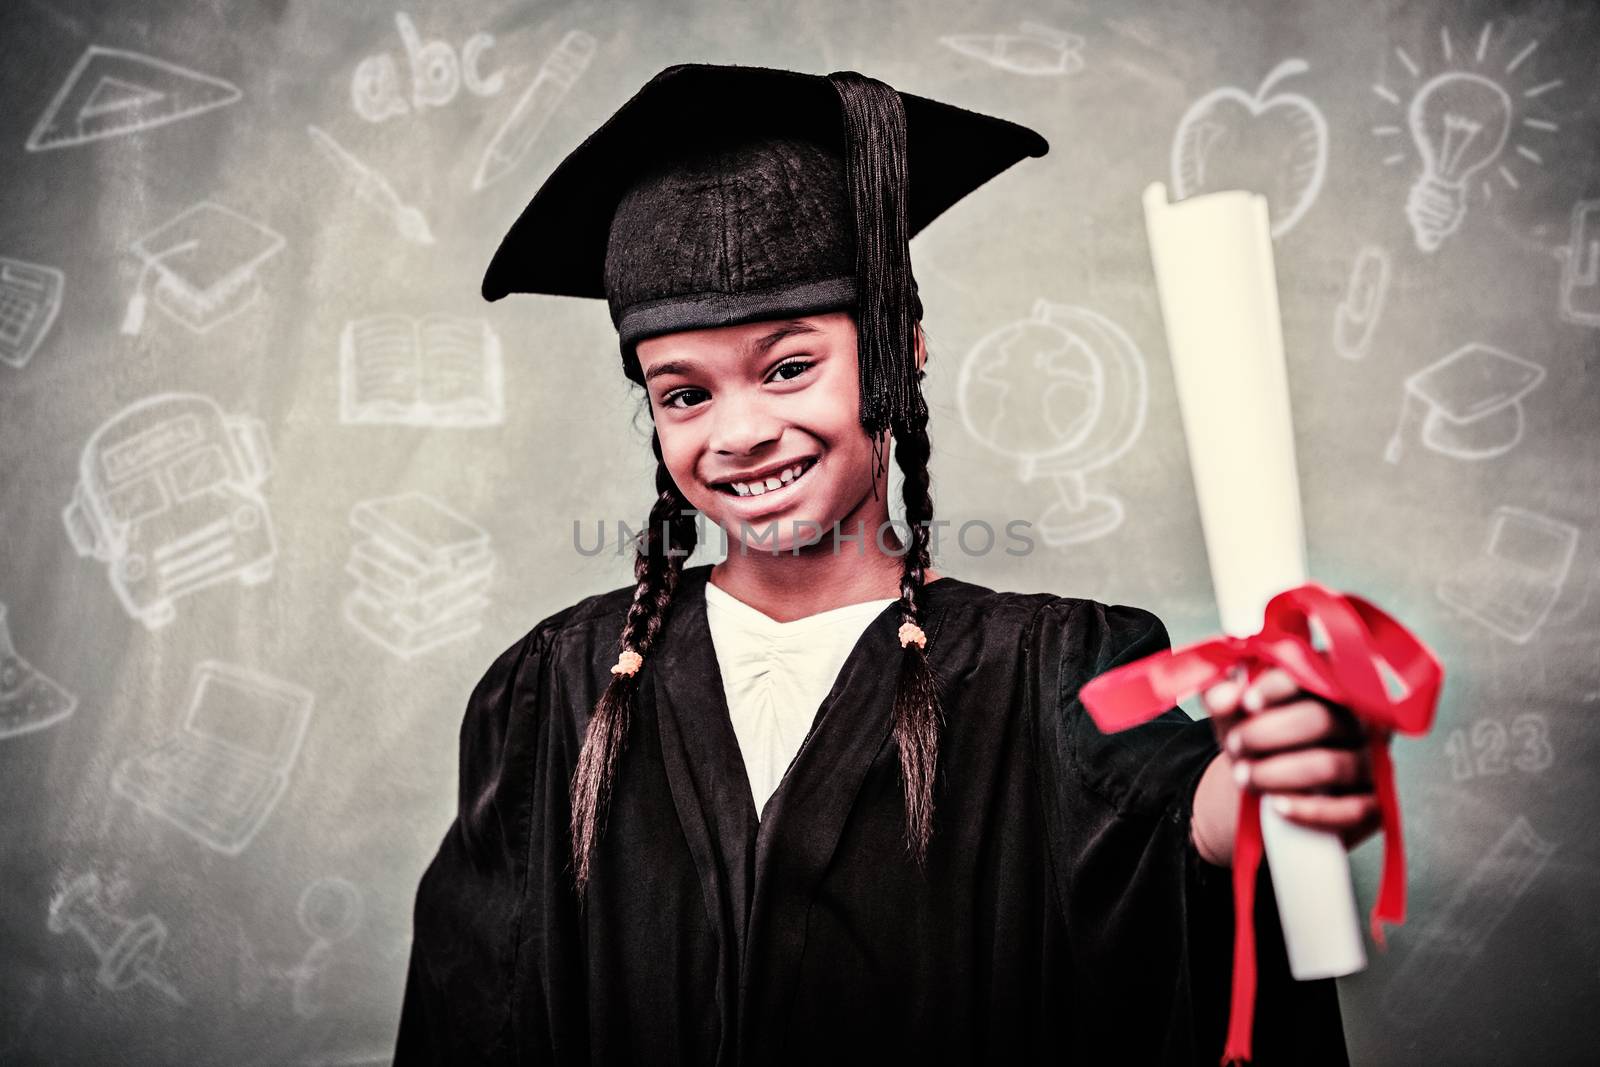 Education doodles against little girl in graduation robe holding diploma